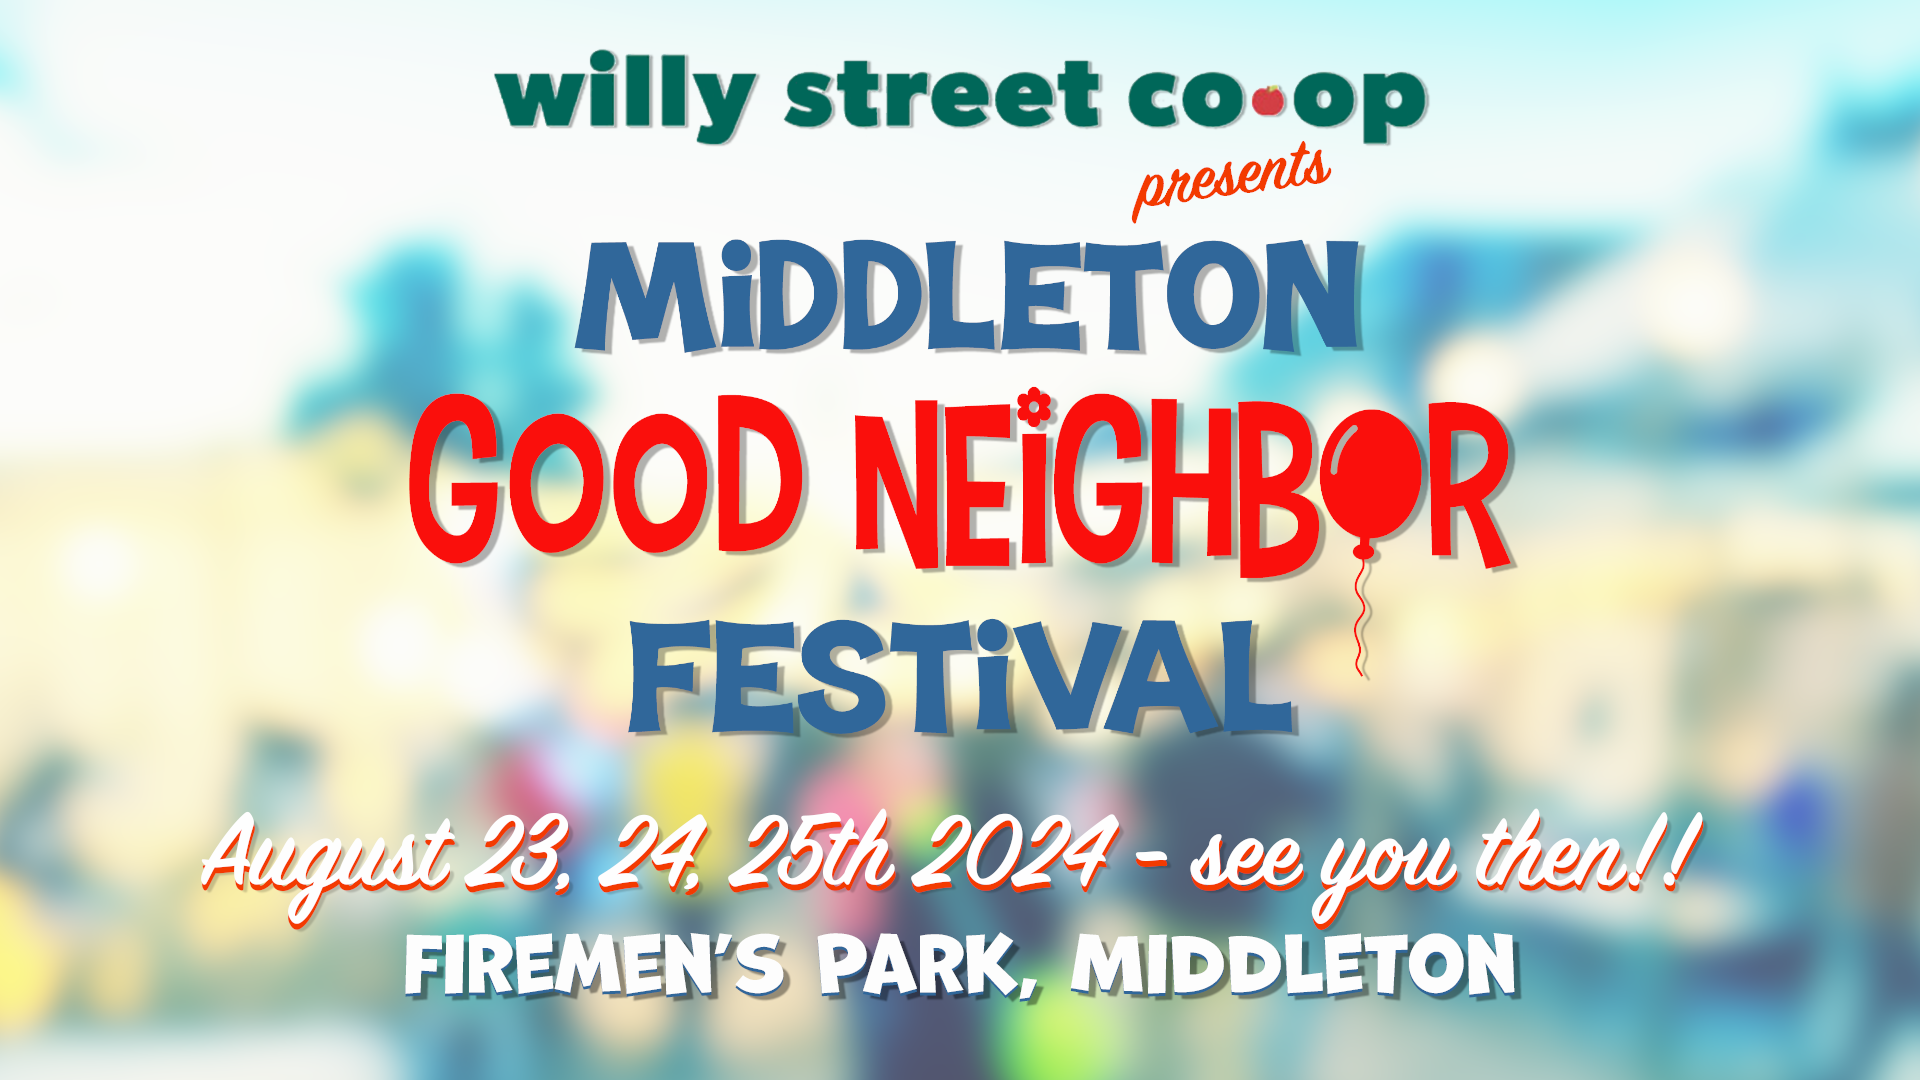 Middleton Good Neighbor Festival August 23 through the 25th 2024. See you there!